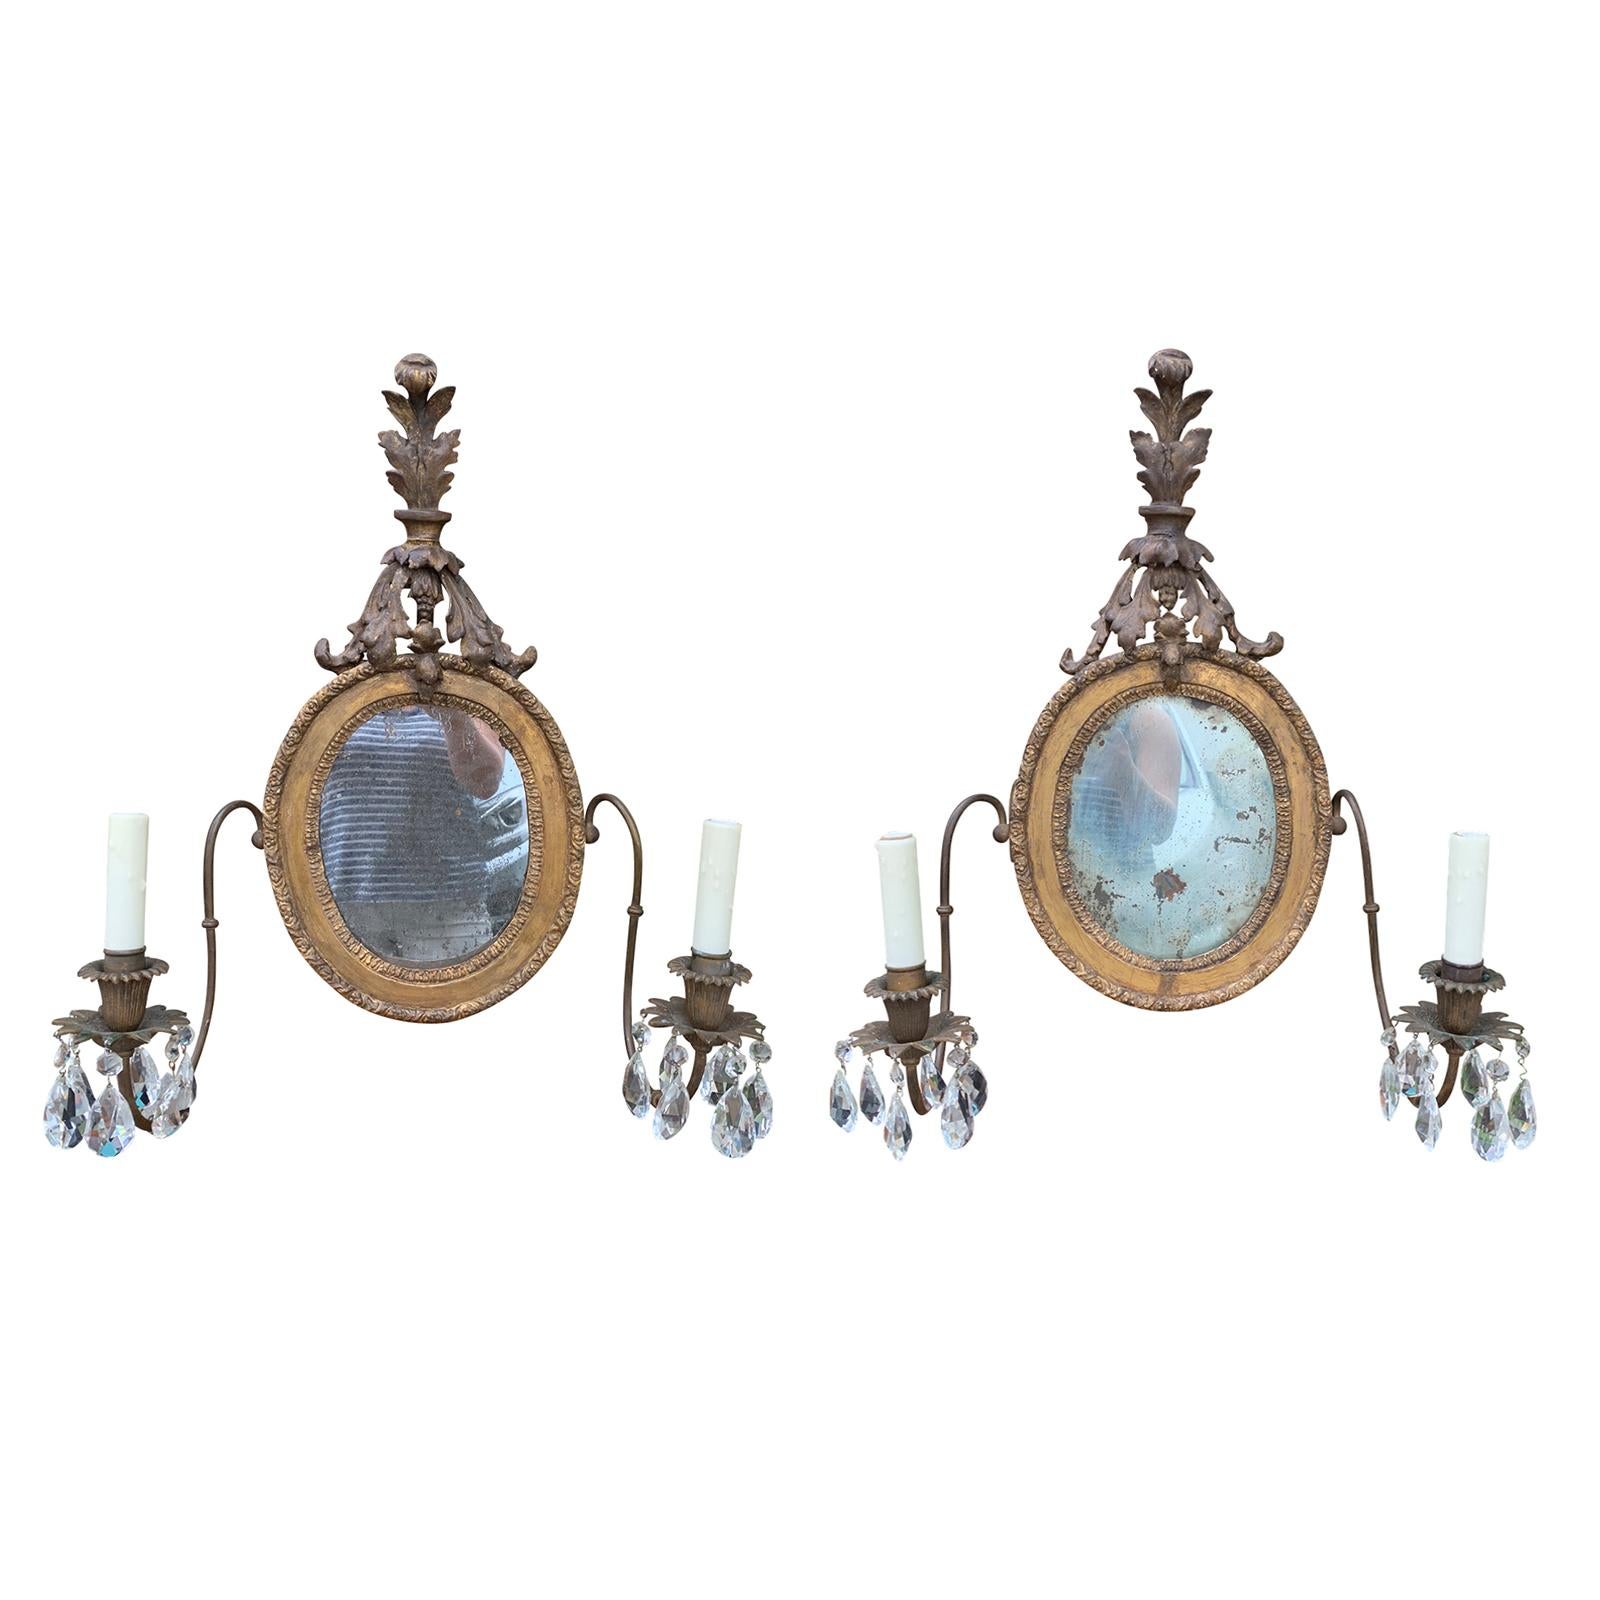 Pair of 18th Century Giltwood Girandole Sconces with Mirrors